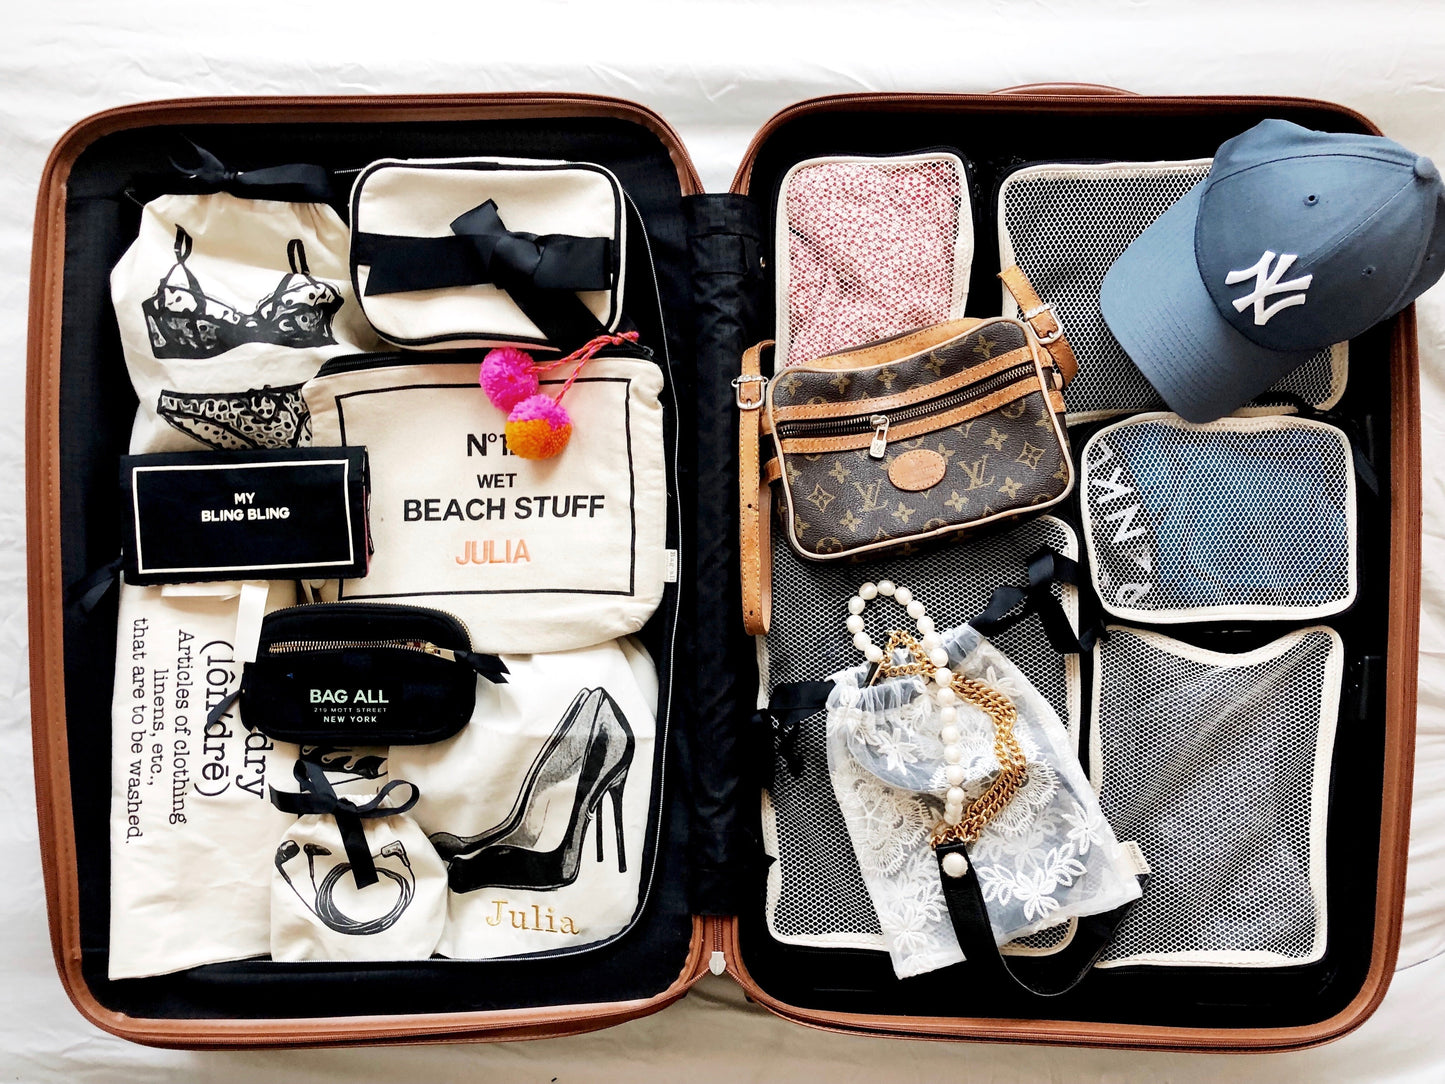 LOUIS VUITTON TRAVEL ACCESSORIES + HOW I PACK MY PACKING CUBE